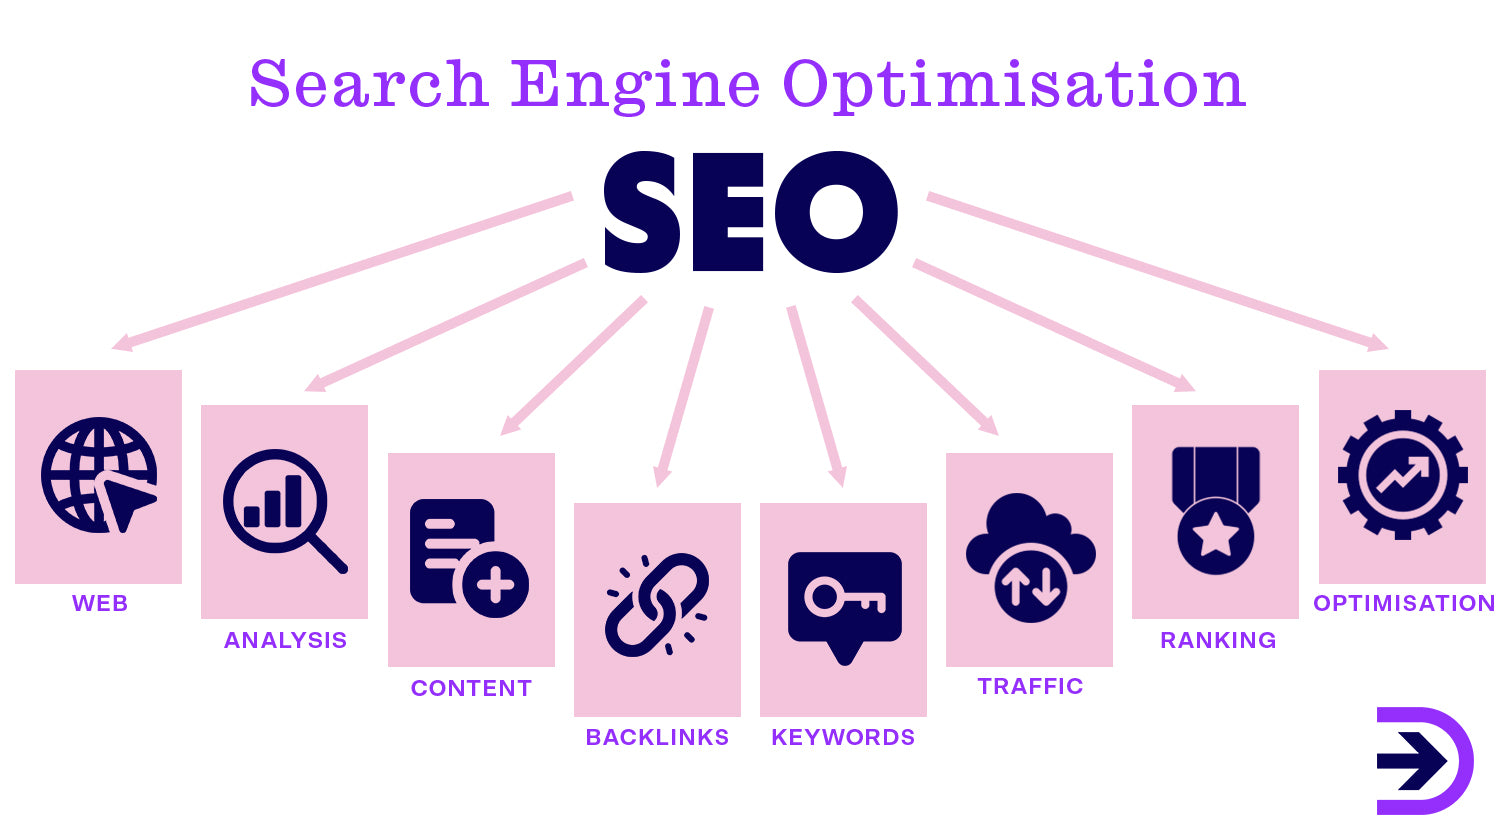 SEO should include optimising your website's product descriptions, title tags, headings, internal links, meta descriptions, URL structure, and alt text for images. 